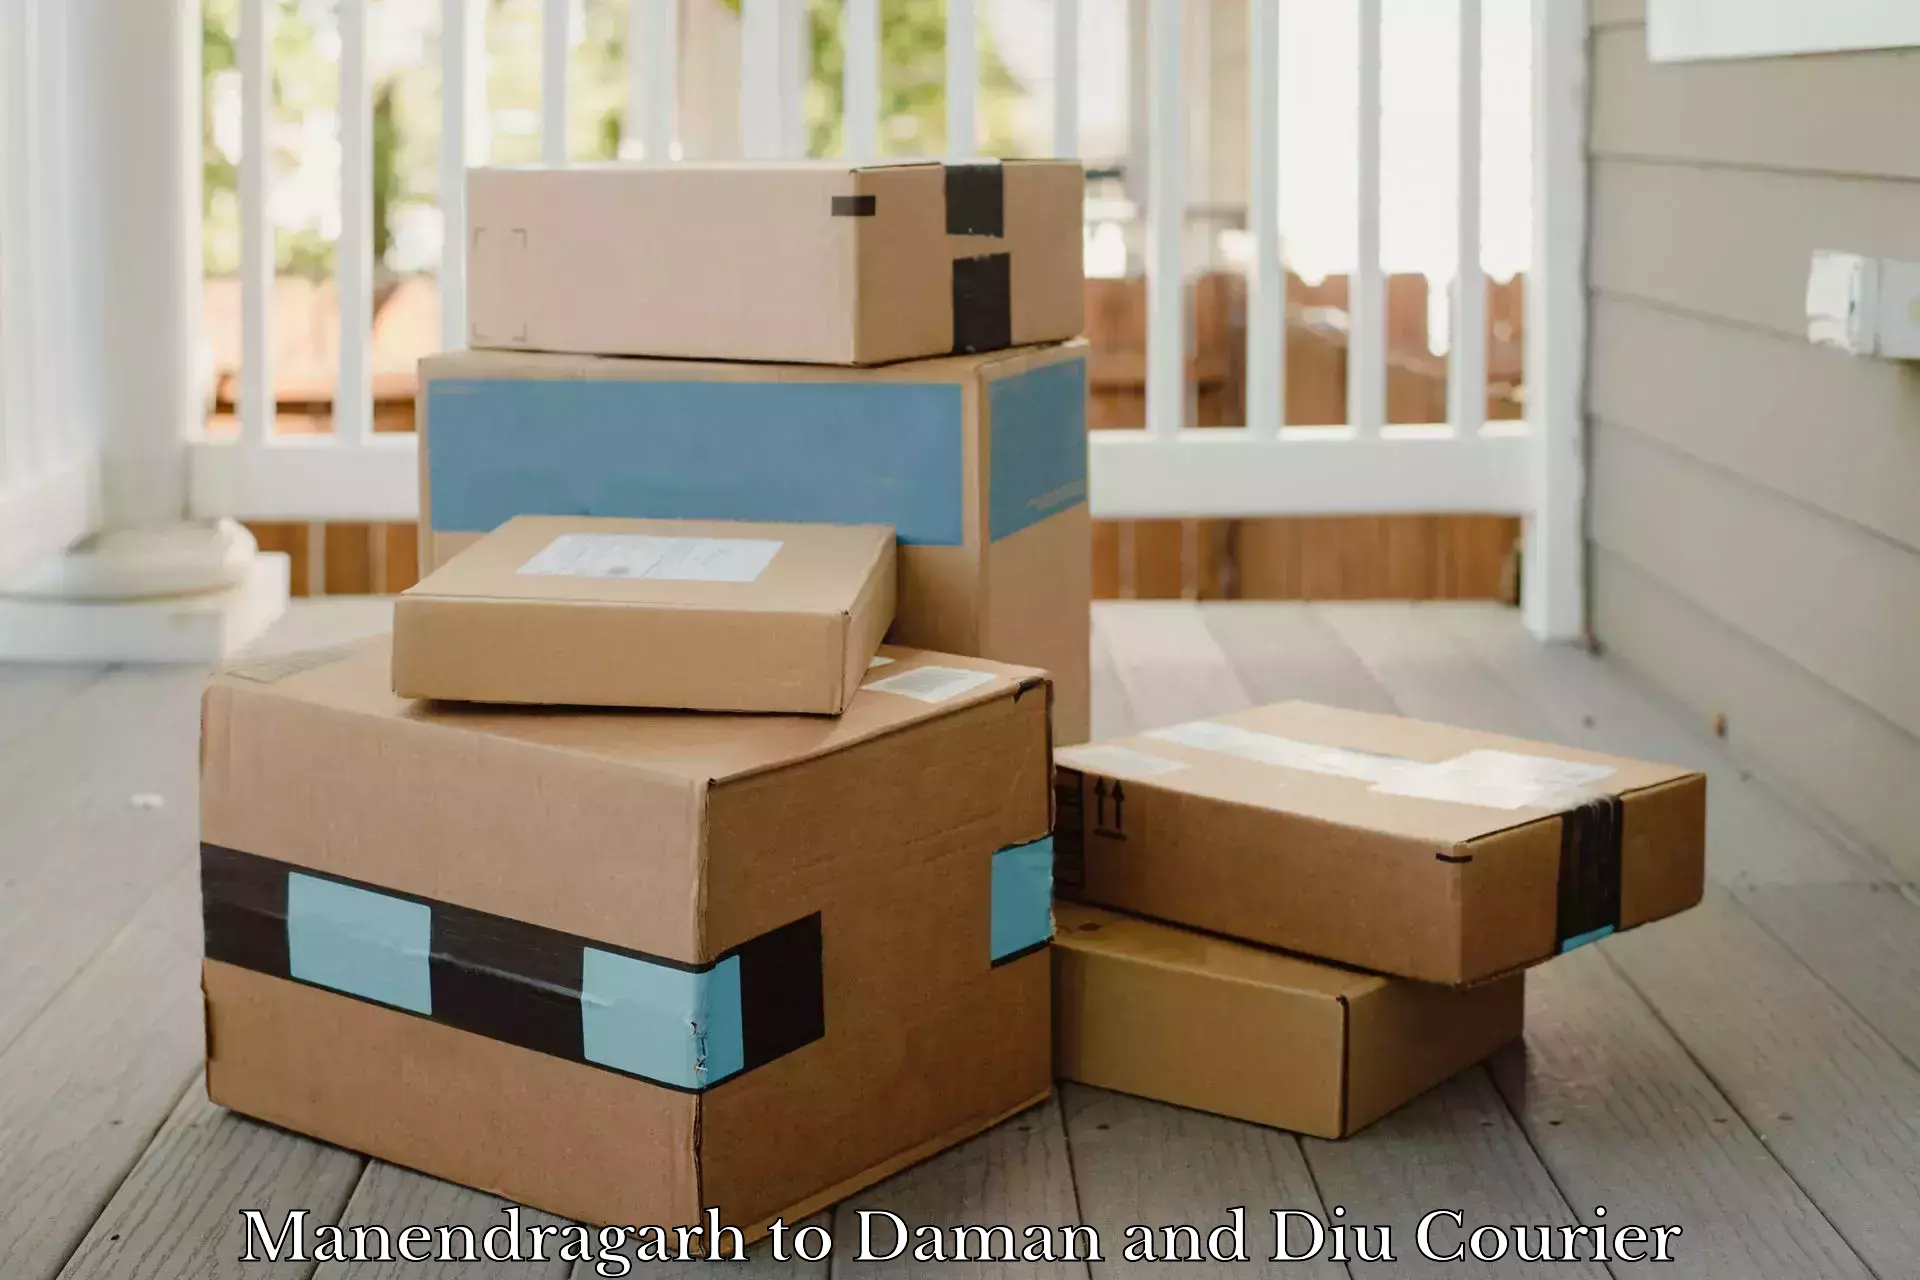 Automated shipping processes Manendragarh to Daman